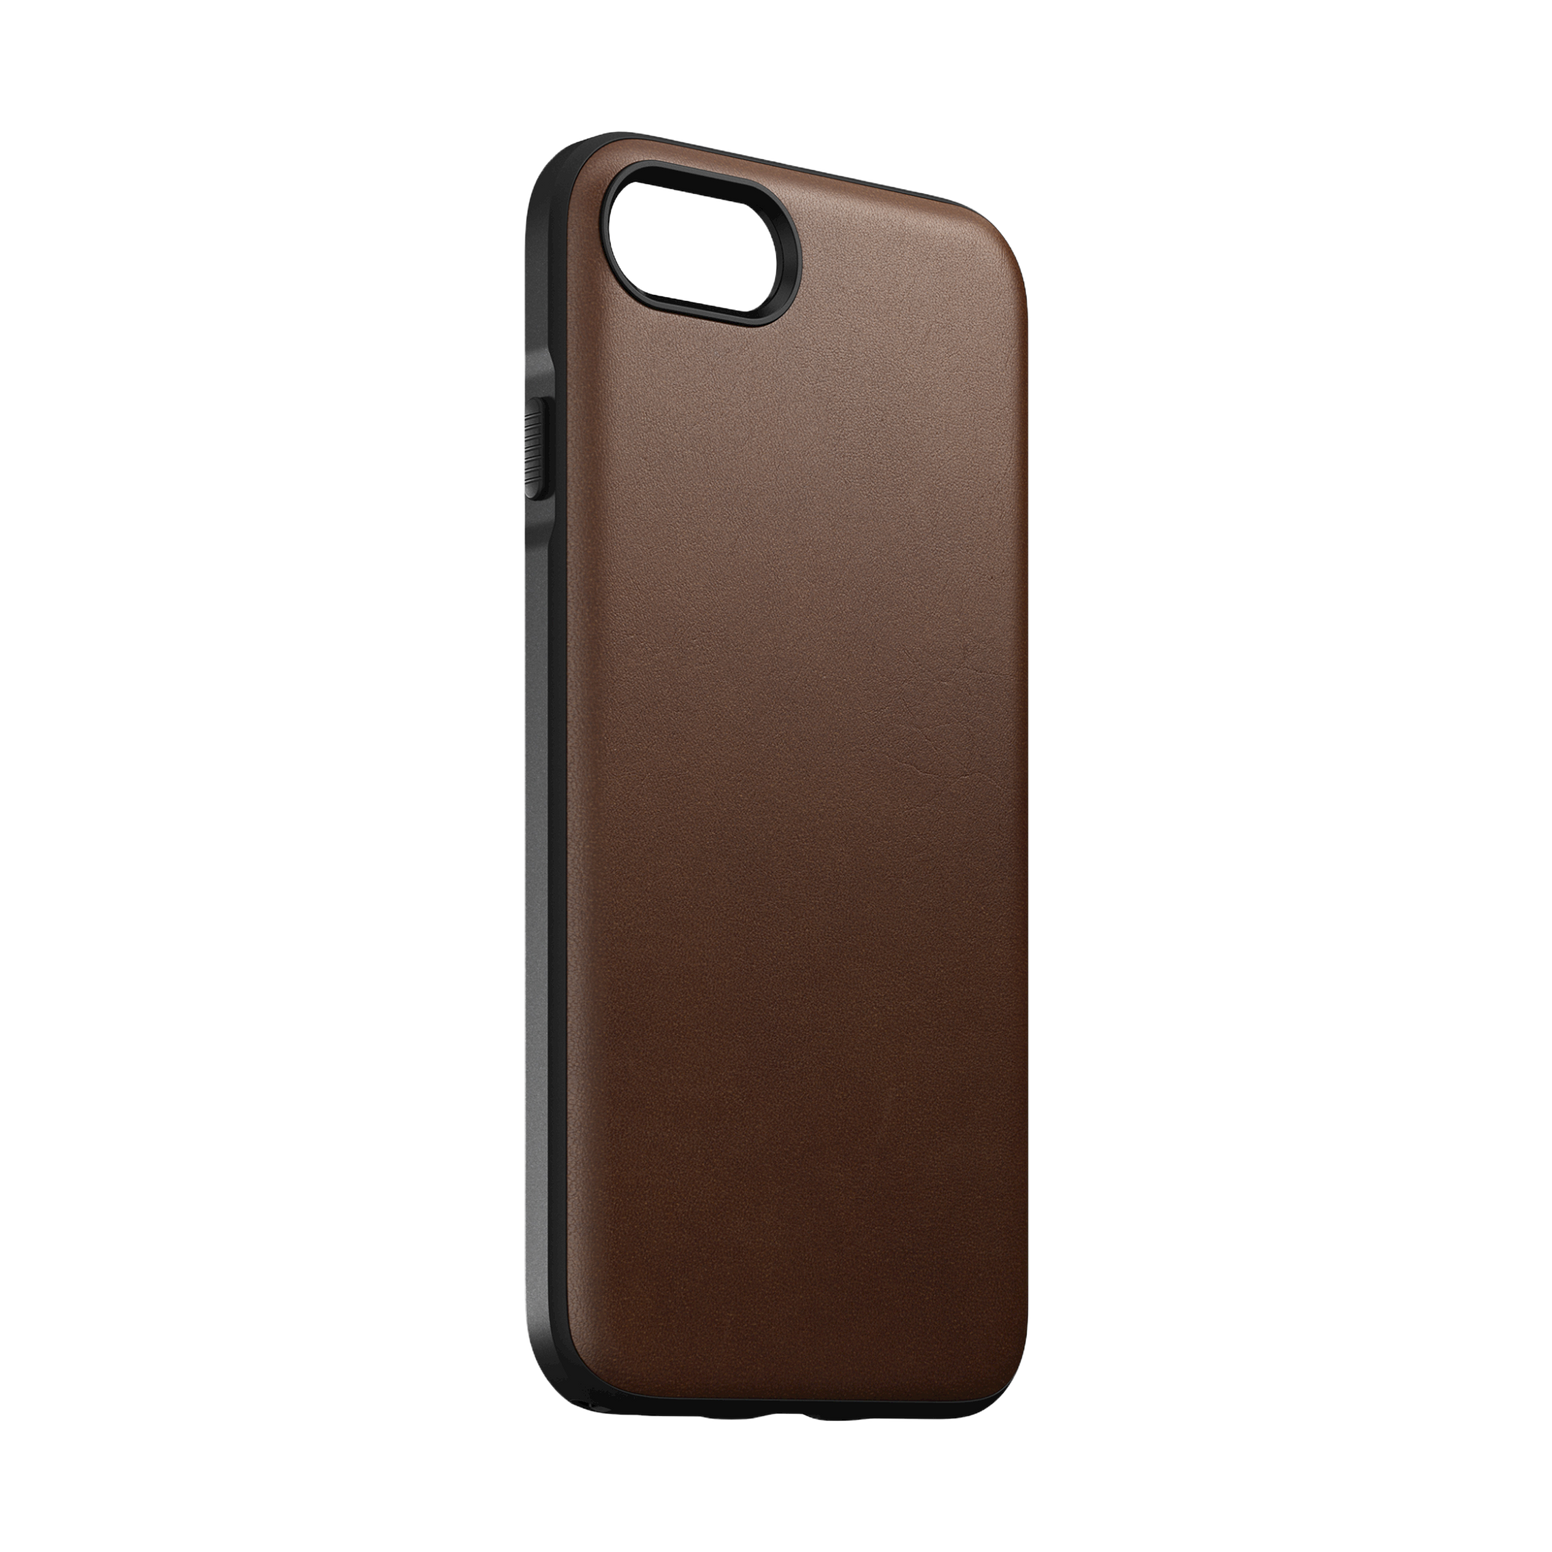 Nomad Modern Leather Case for iPhone SE - Rustic Brown - Discontinued